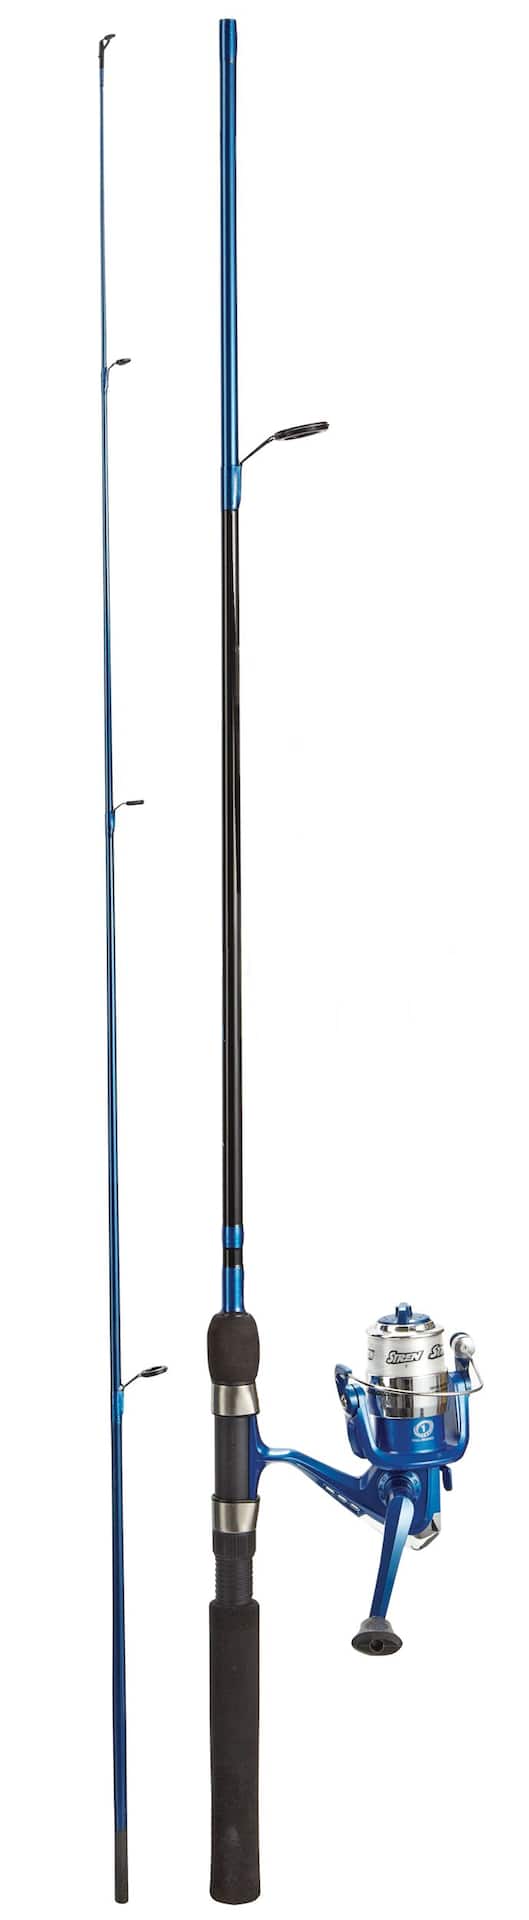 Zebco Ready Tackle Spincast Combo - 5ft 6in, Medium Light Power